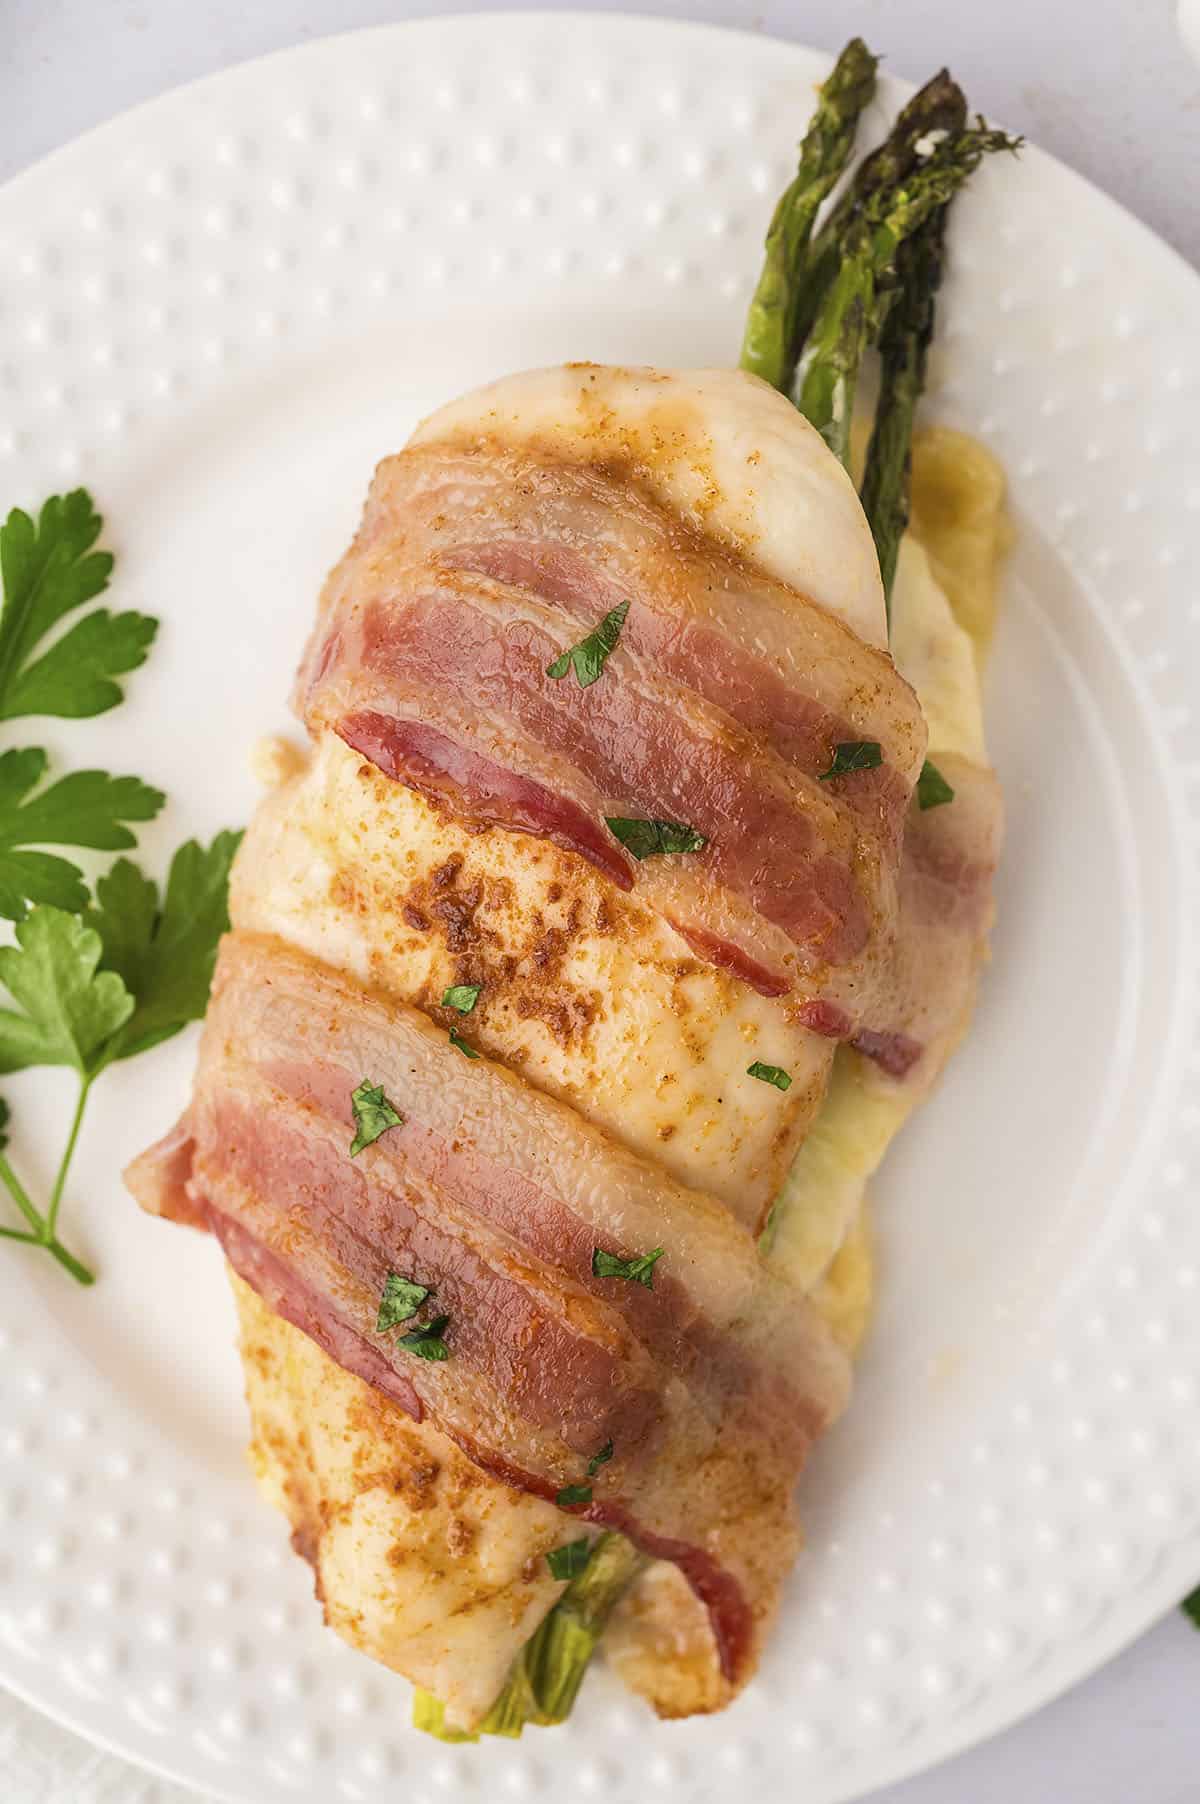 Chicken breast stuffed with asparagus and wrapped in bacon.